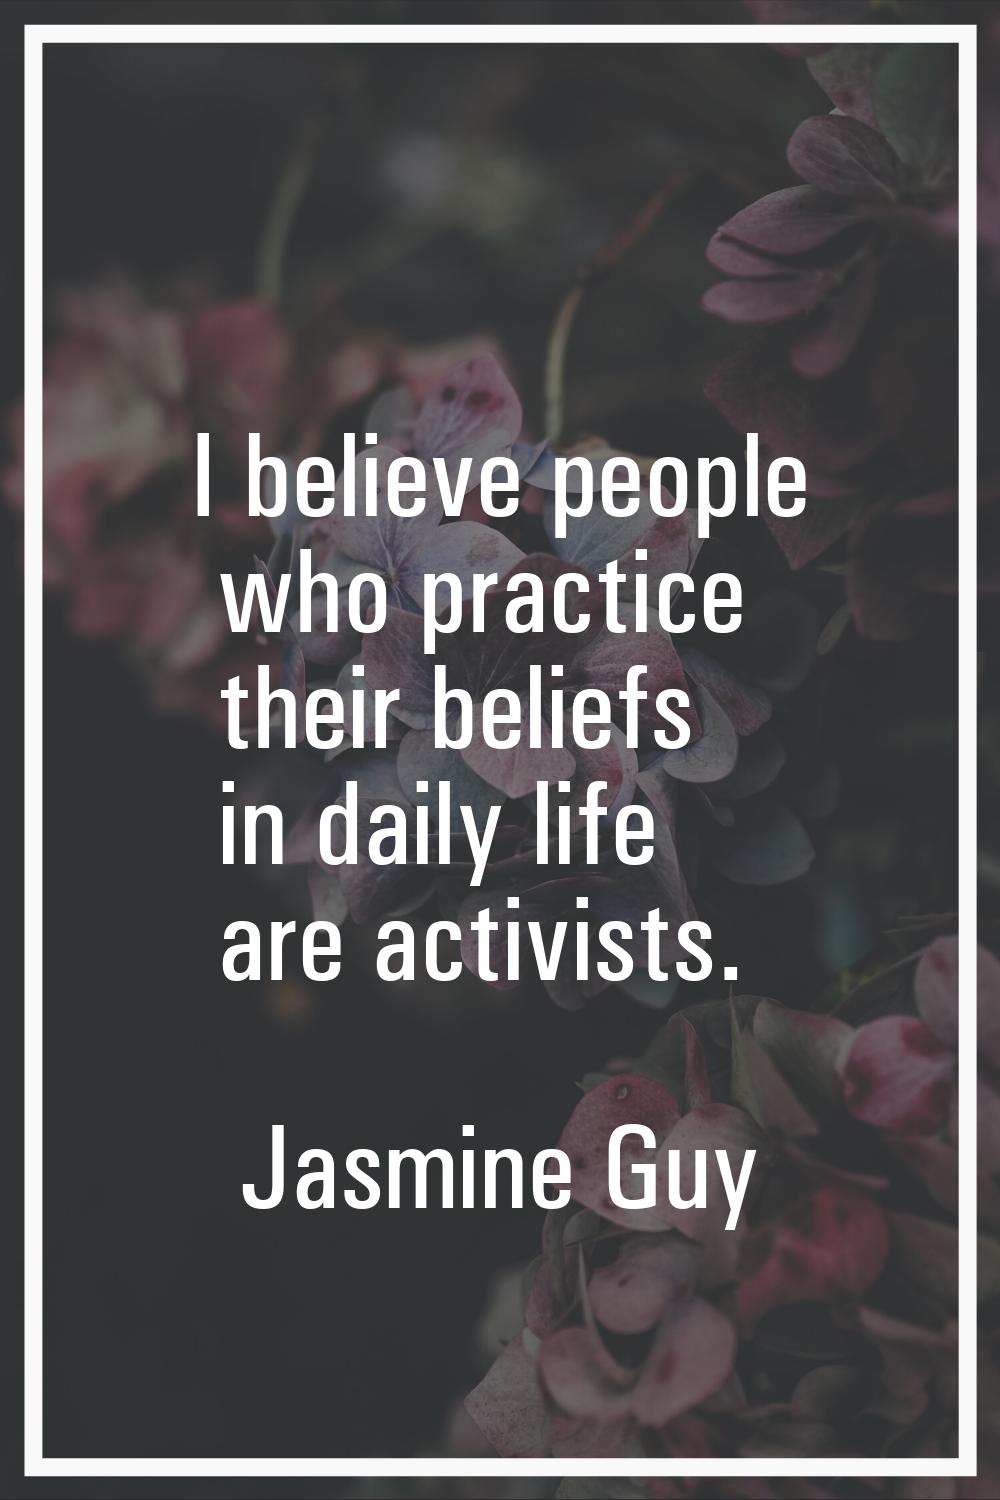 I believe people who practice their beliefs in daily life are activists.